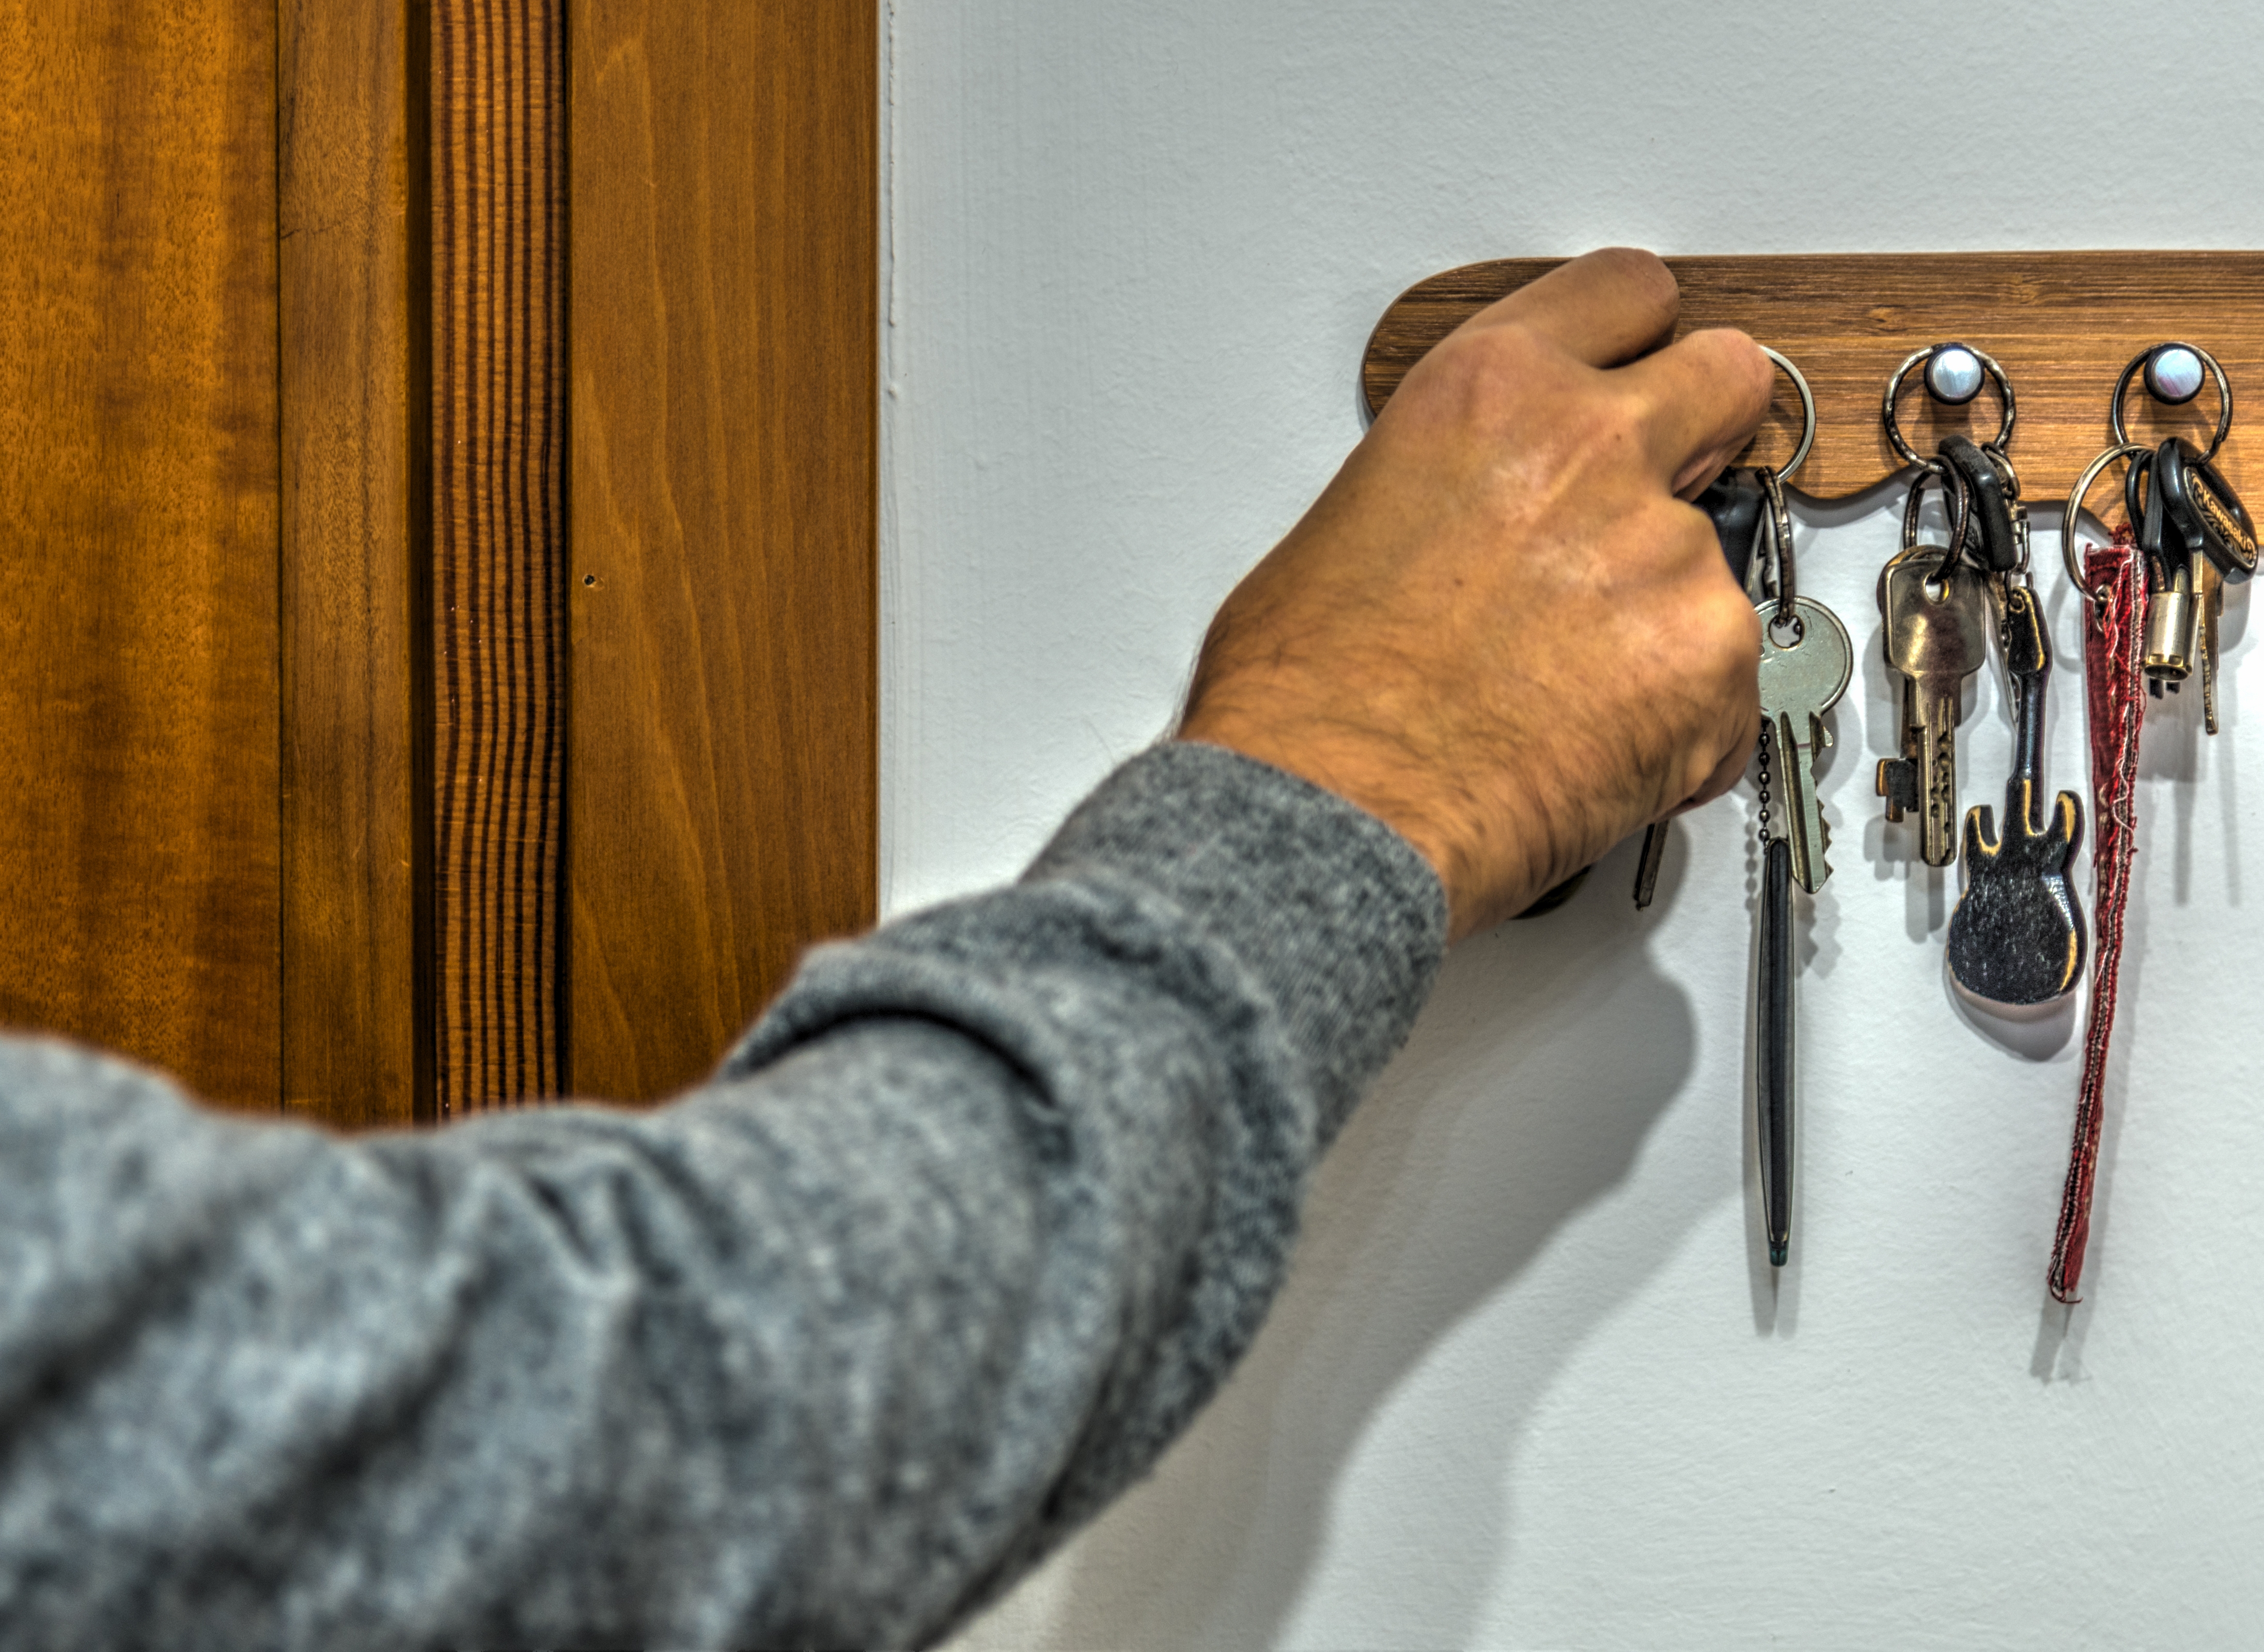 Close up of a man's hand grabbing a key from the key holder. | Source: Shutterstock